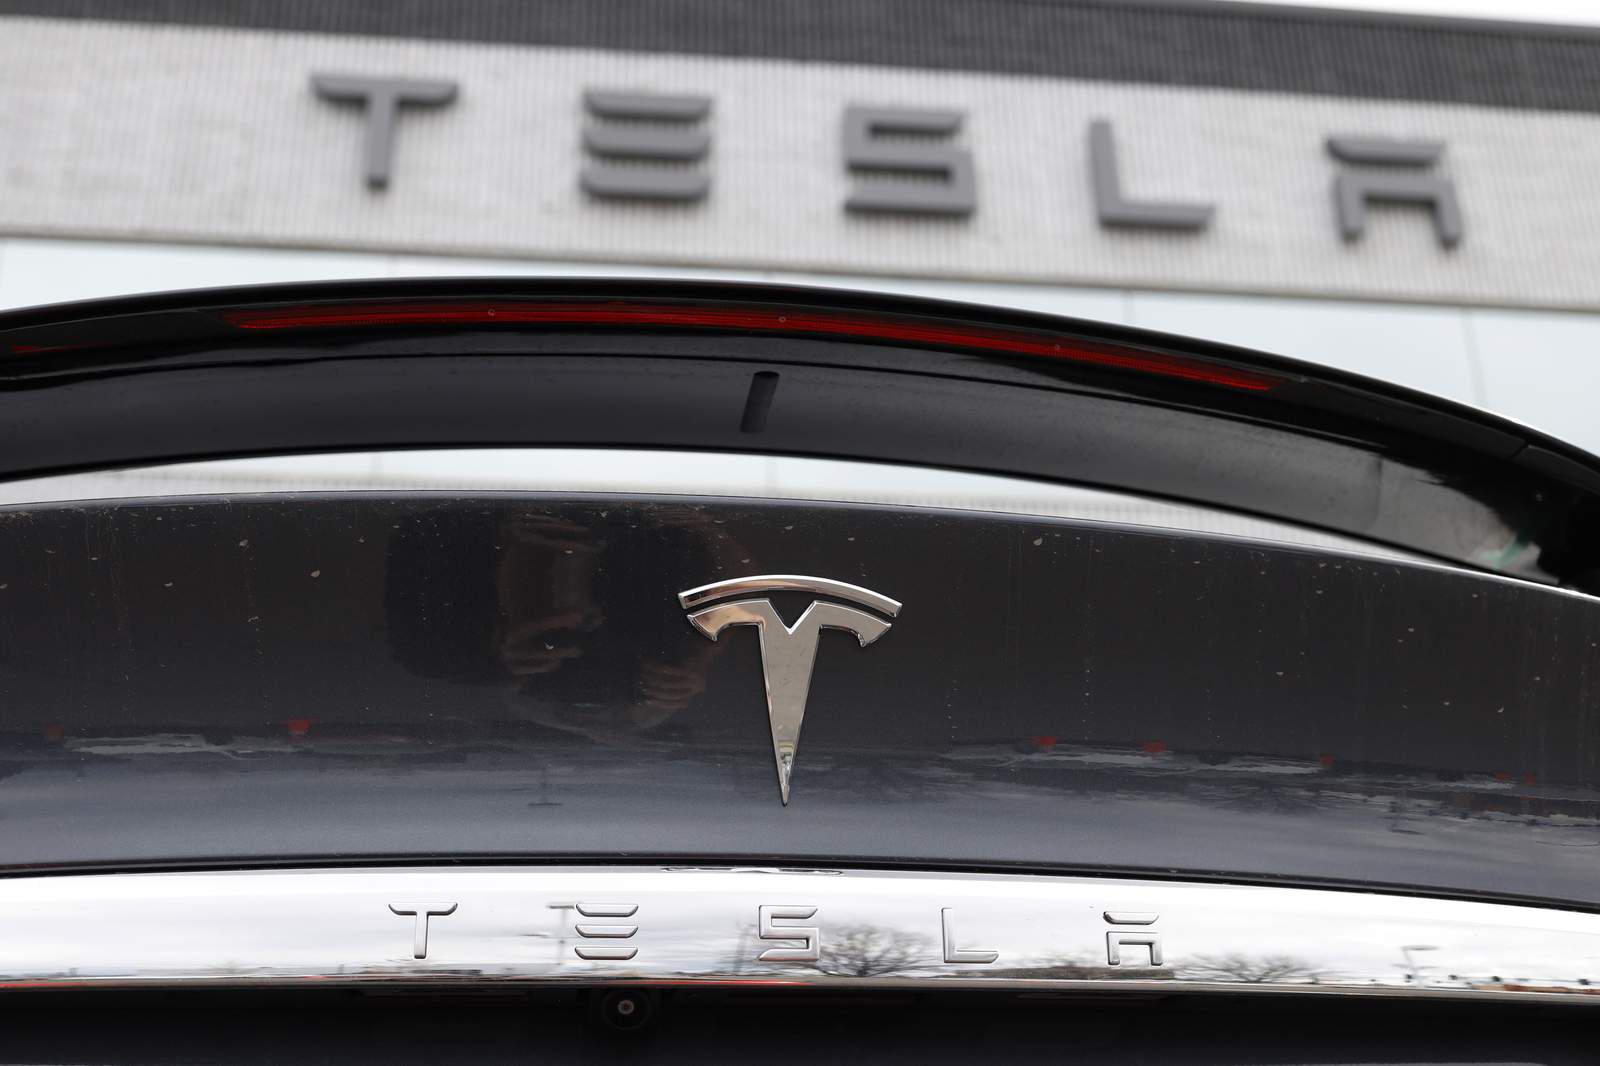 Tesla picks Texas site for second US vehicle assembly plant